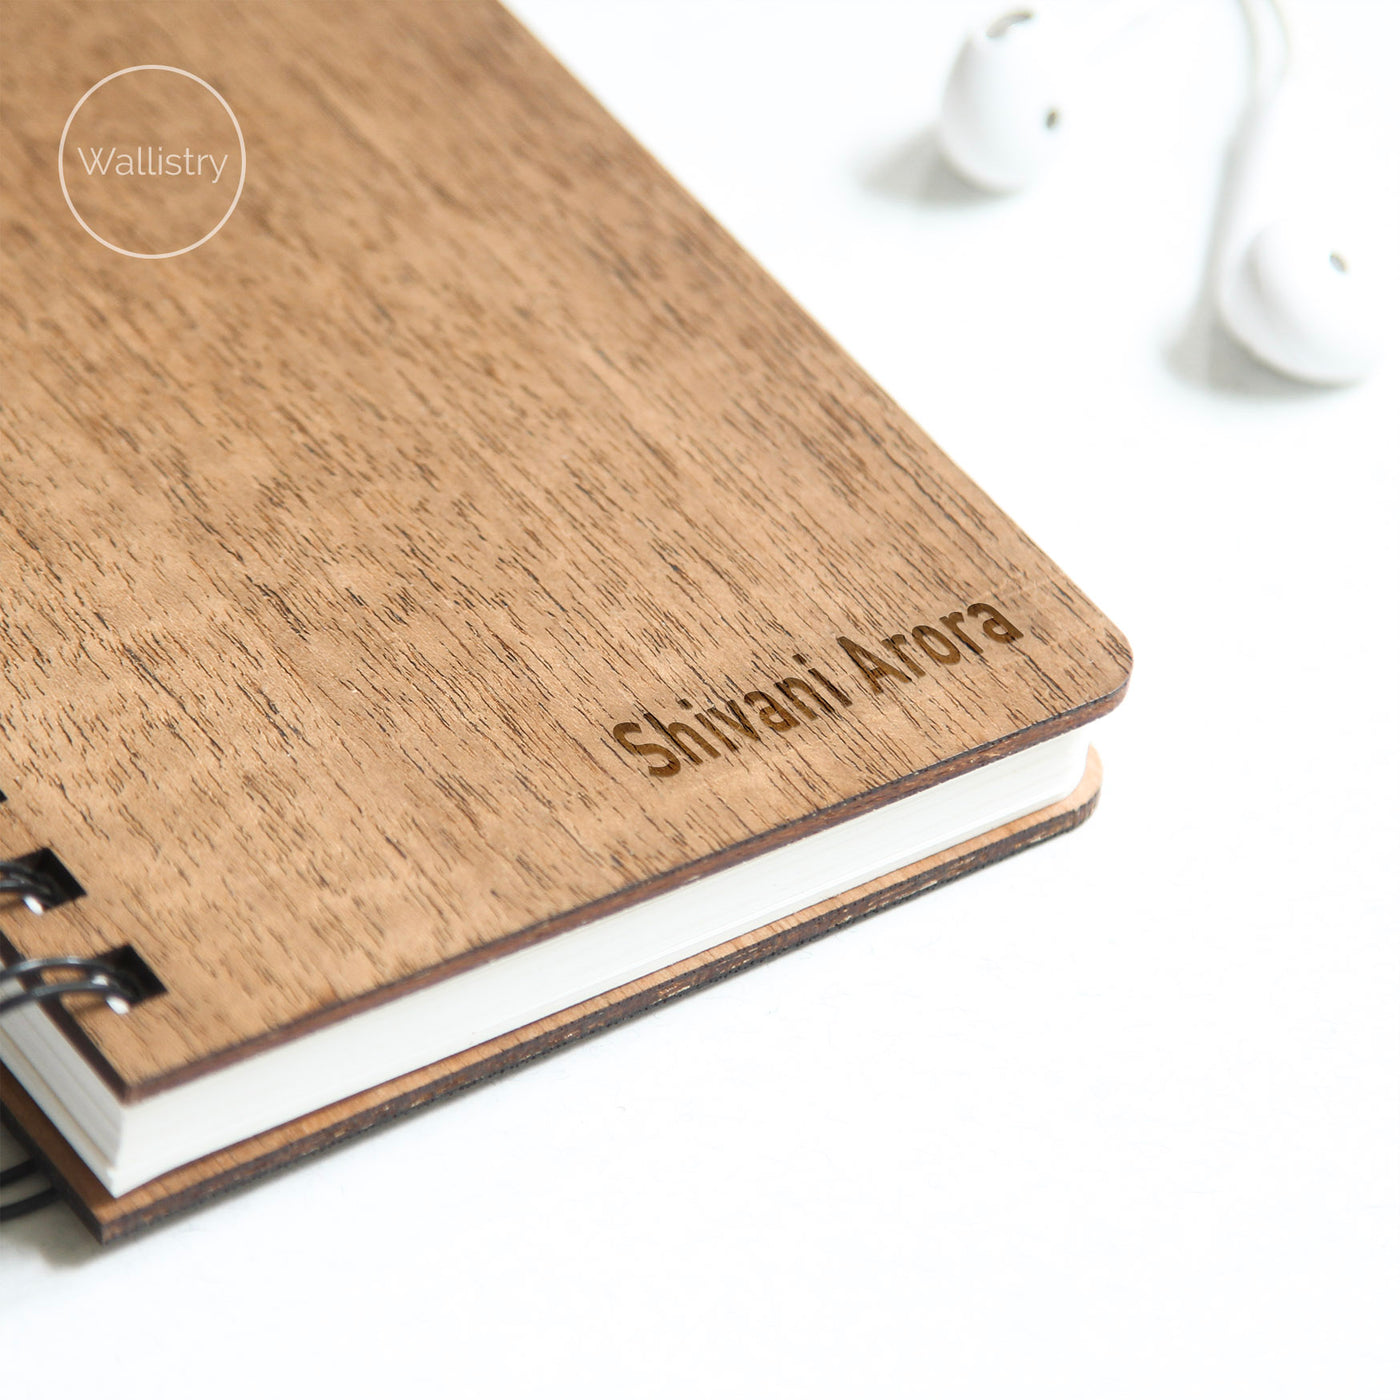 Personalize Your Notebook